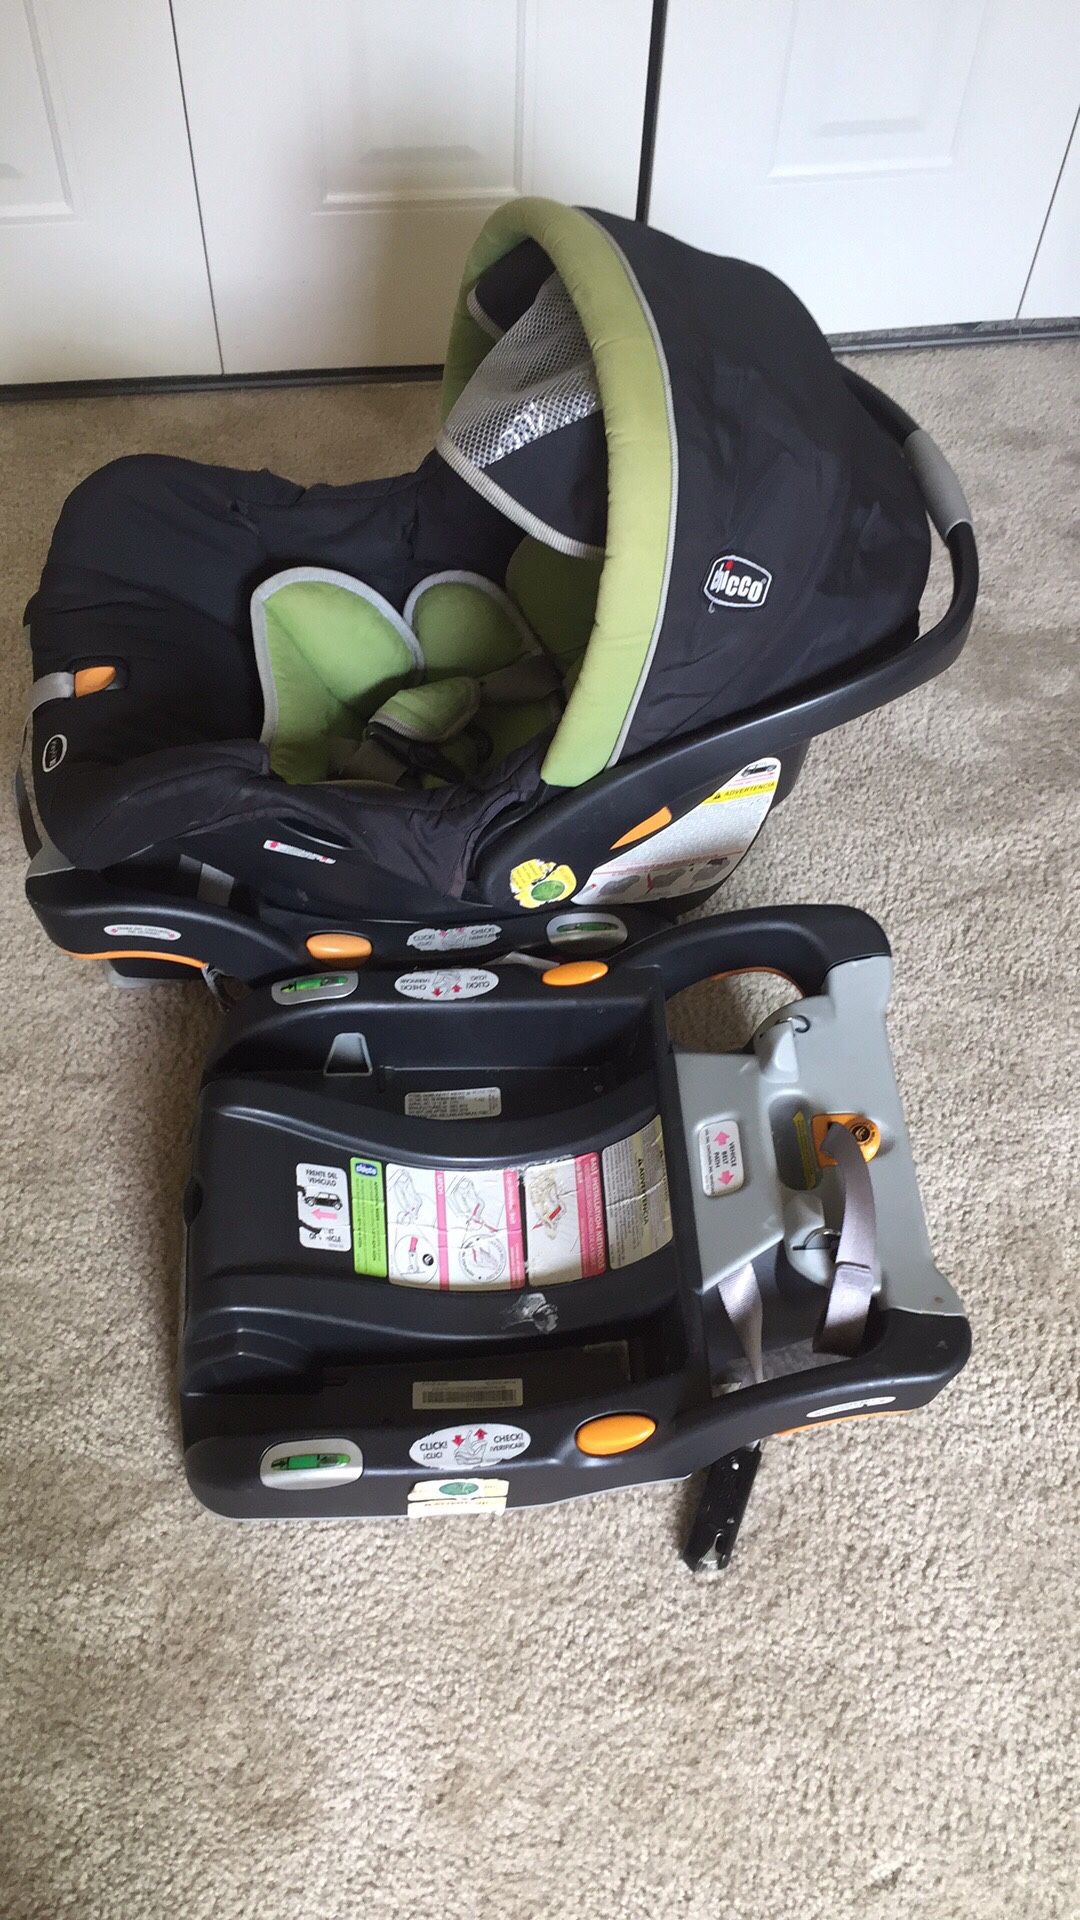 Used Chicco car seat with 2 bases and stroller